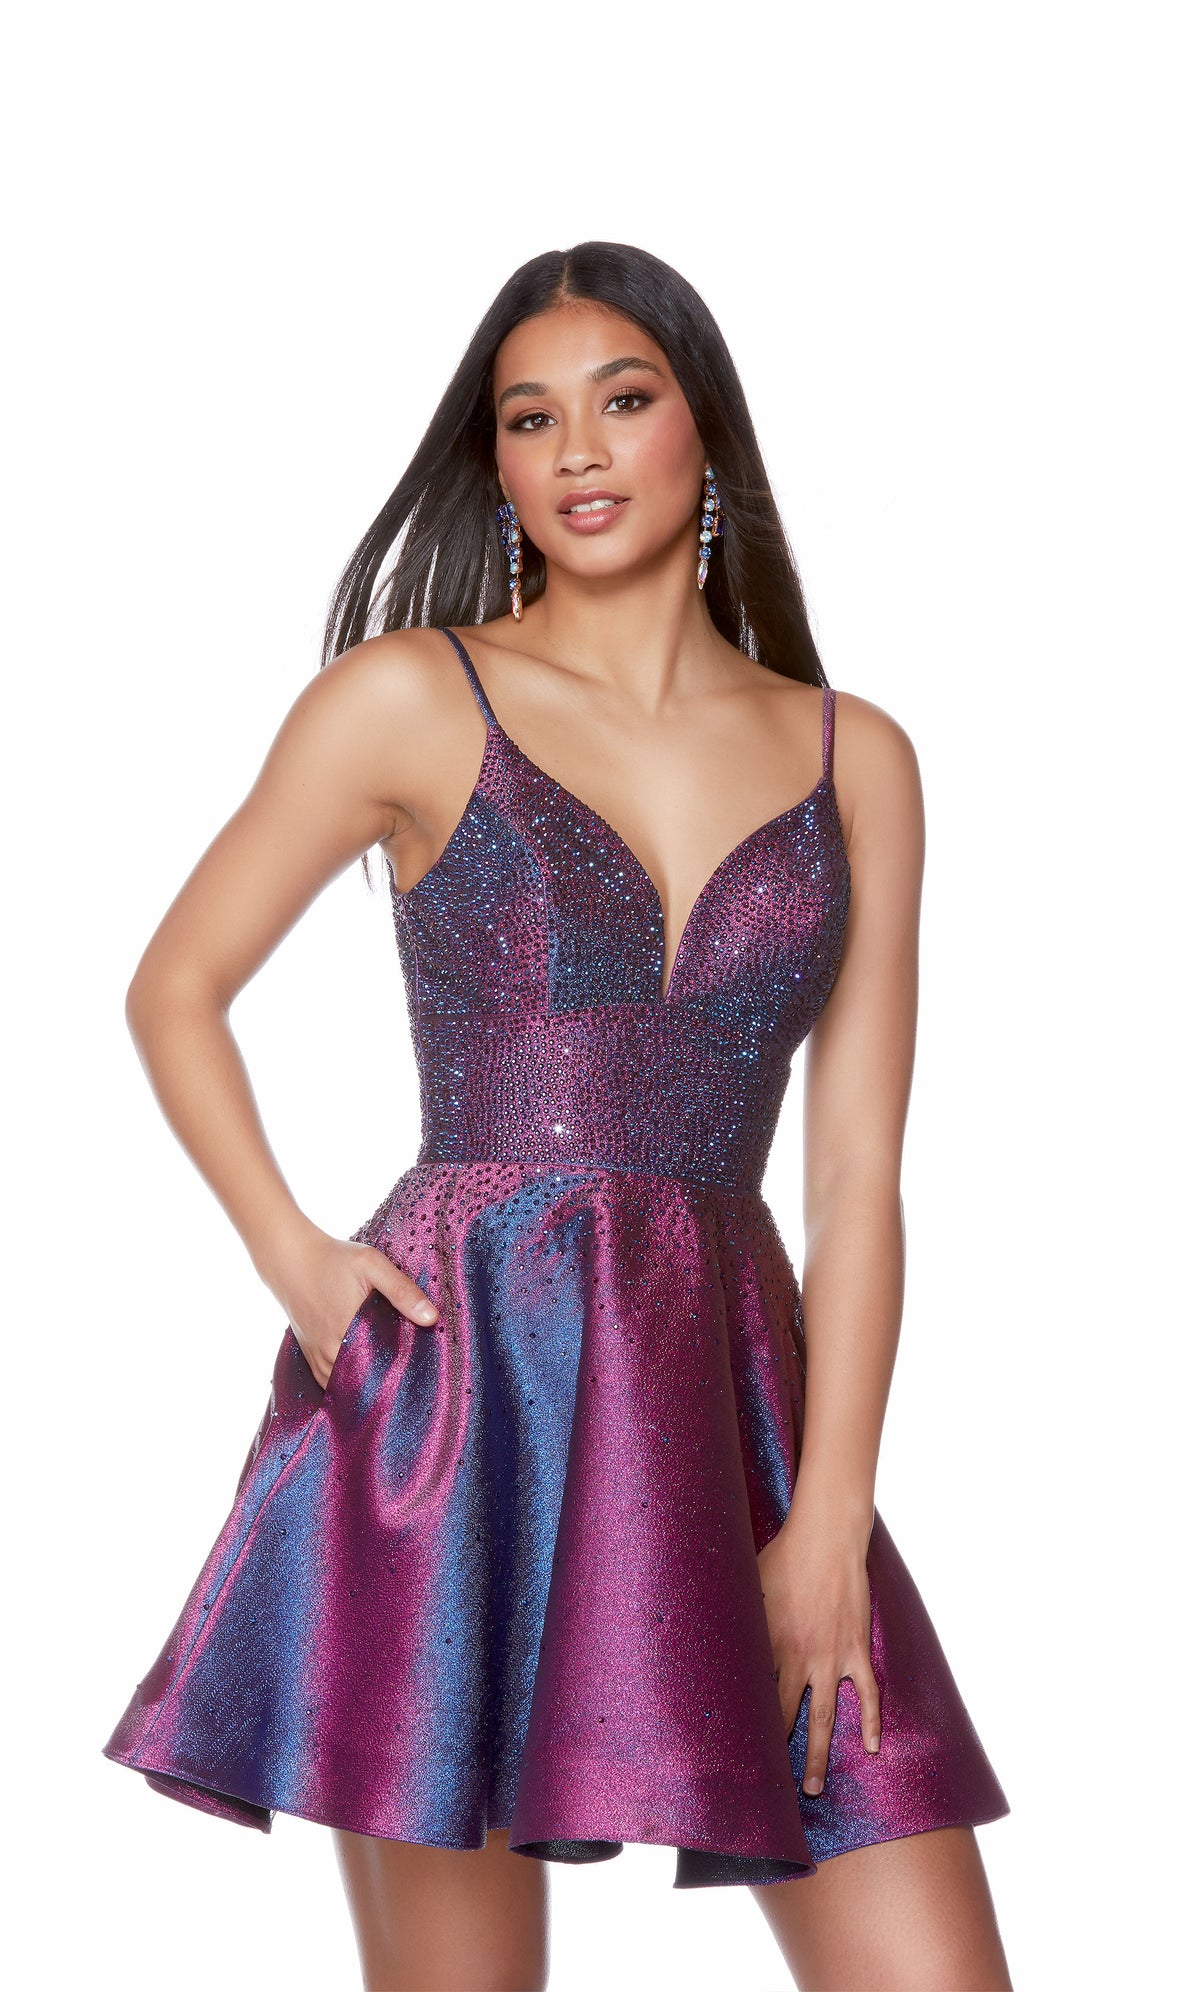 A sparkly metallic short homecoming dress boasting a plunging neckline, jewel embellished bodice, and a flirty flared skirt. The color is an iridescent blue-ish purple called blueberry.